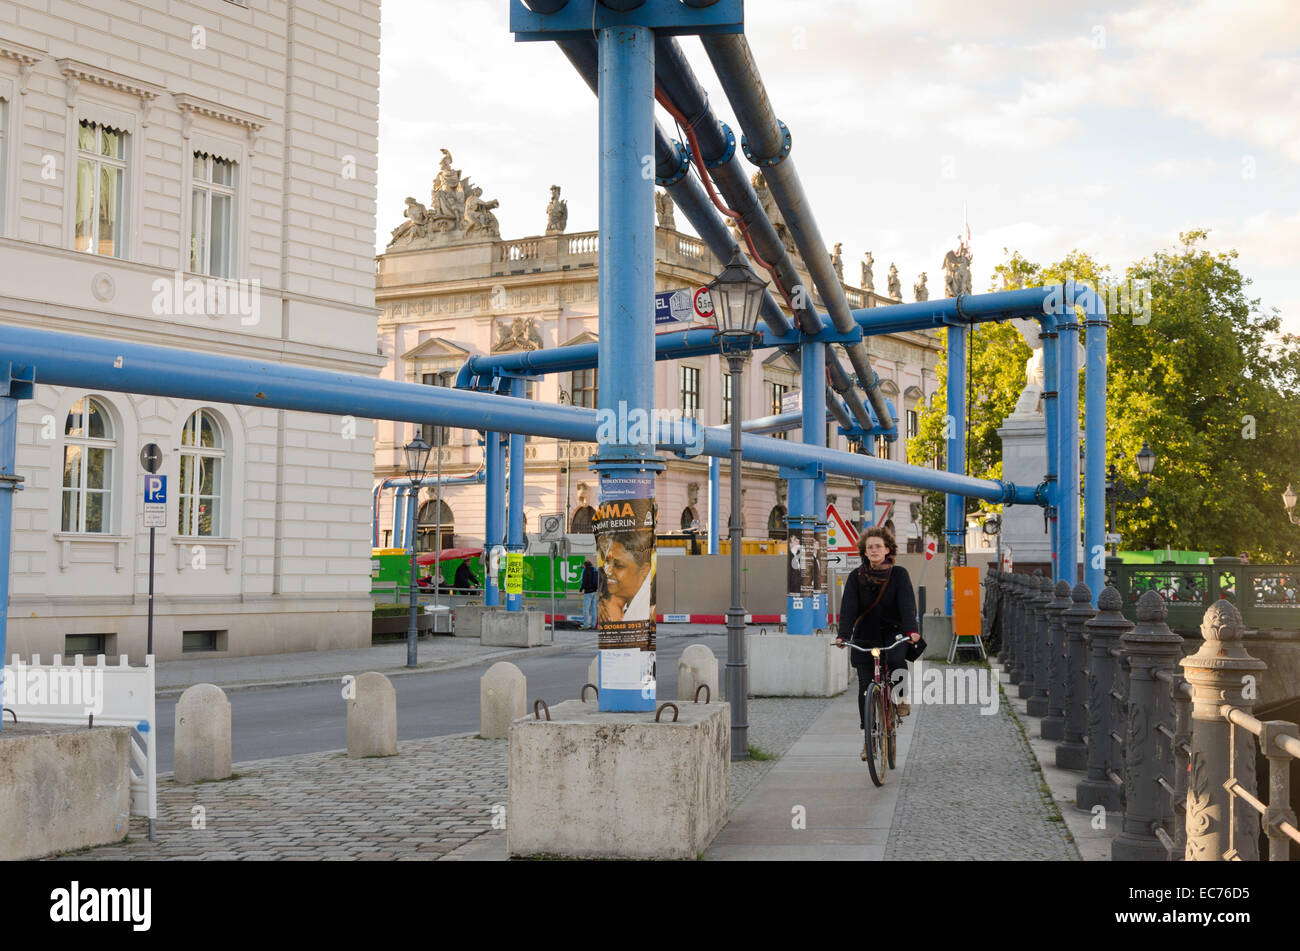 BERLIN, GERMANY - SEPTEMBER 29: A young bicyclist on a sidewalk with painted blue pipes for drainage construction of a subway li Stock Photo